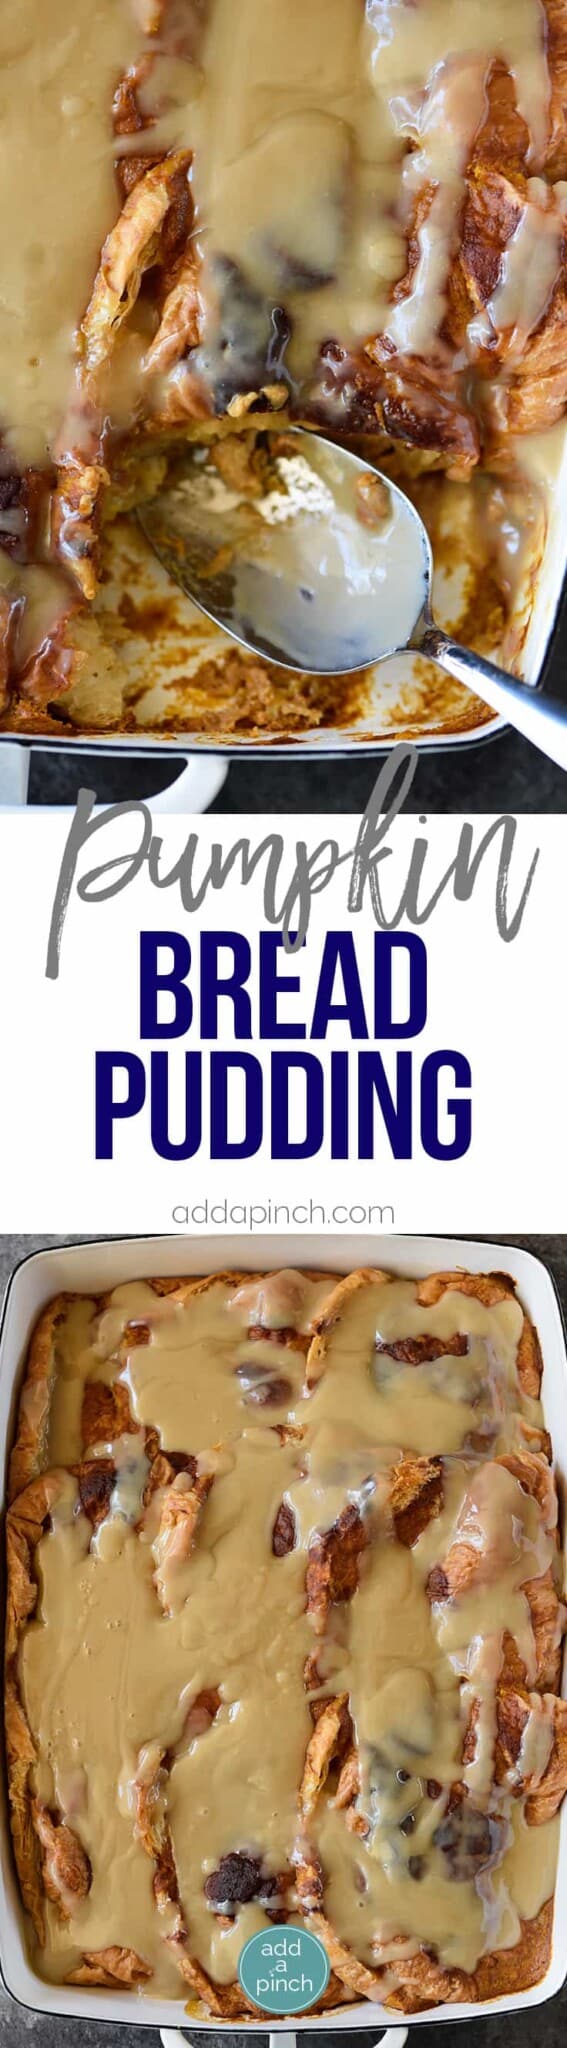 Collage of pumpkin bread pudding photos with text.